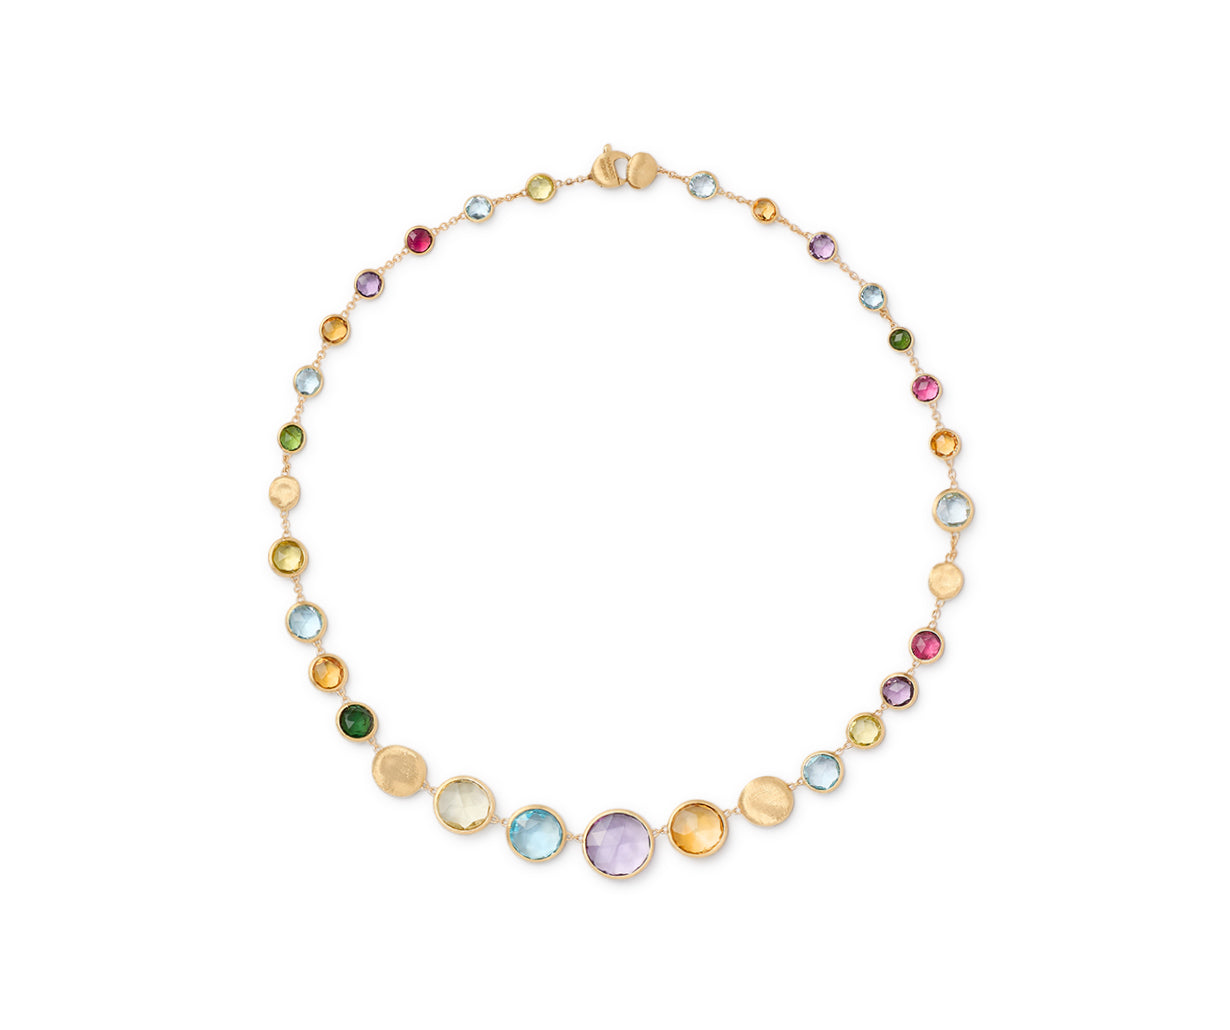 Marco Bicego 18k White Gold Colored Gemstone Necklace